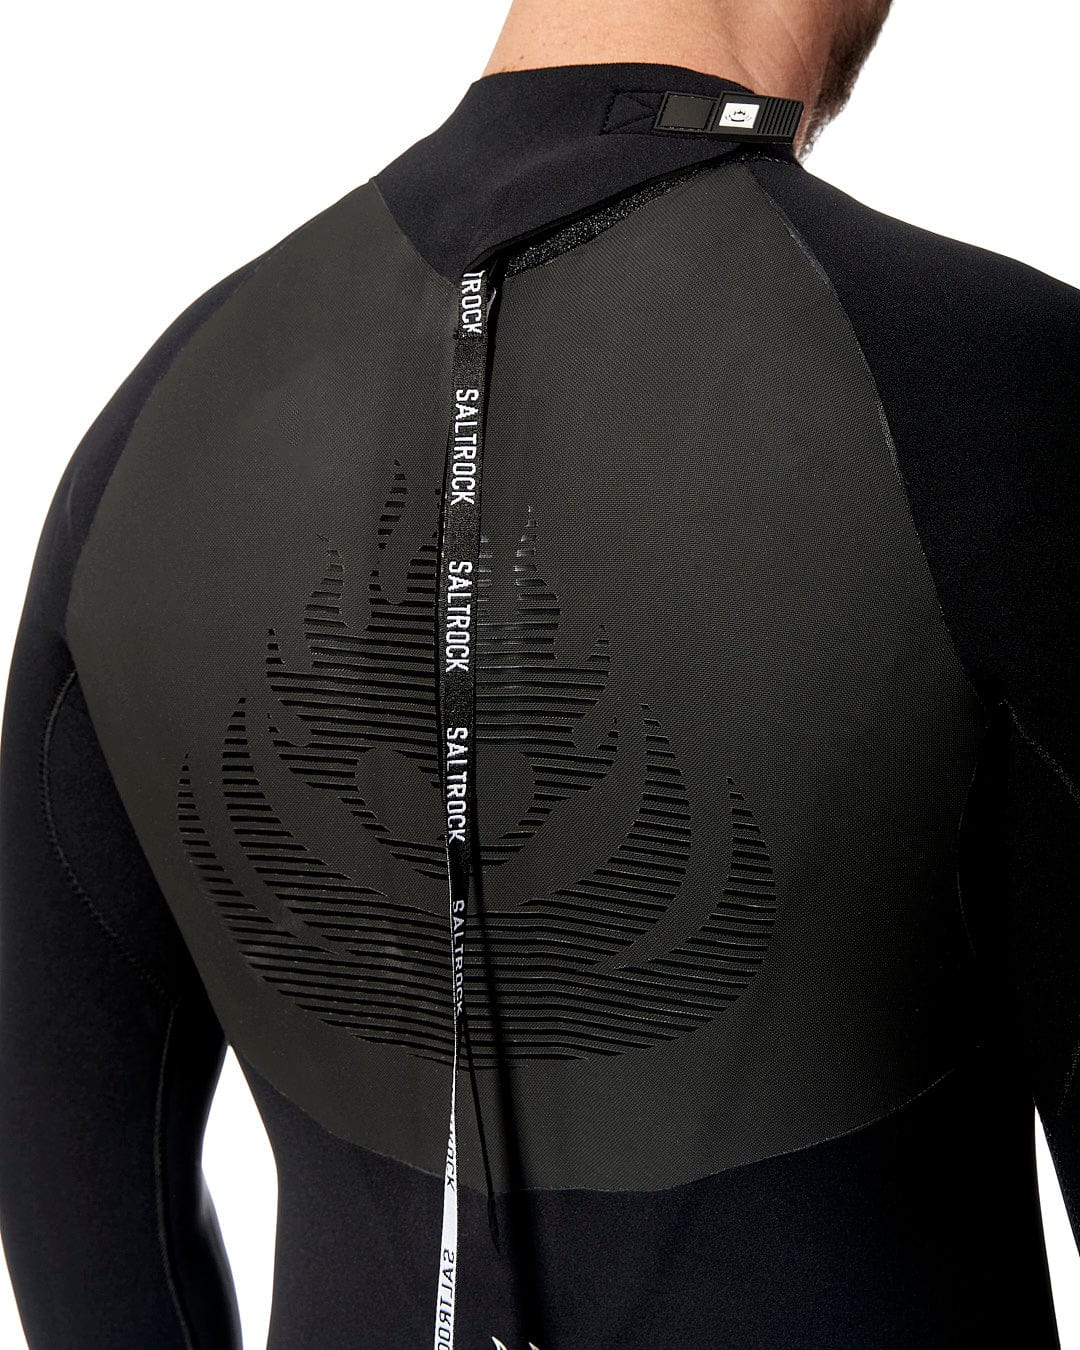 The back view of a man wearing a Saltrock Synthesis - Mens 4/3 Back Zip Full Wetsuit - Black.